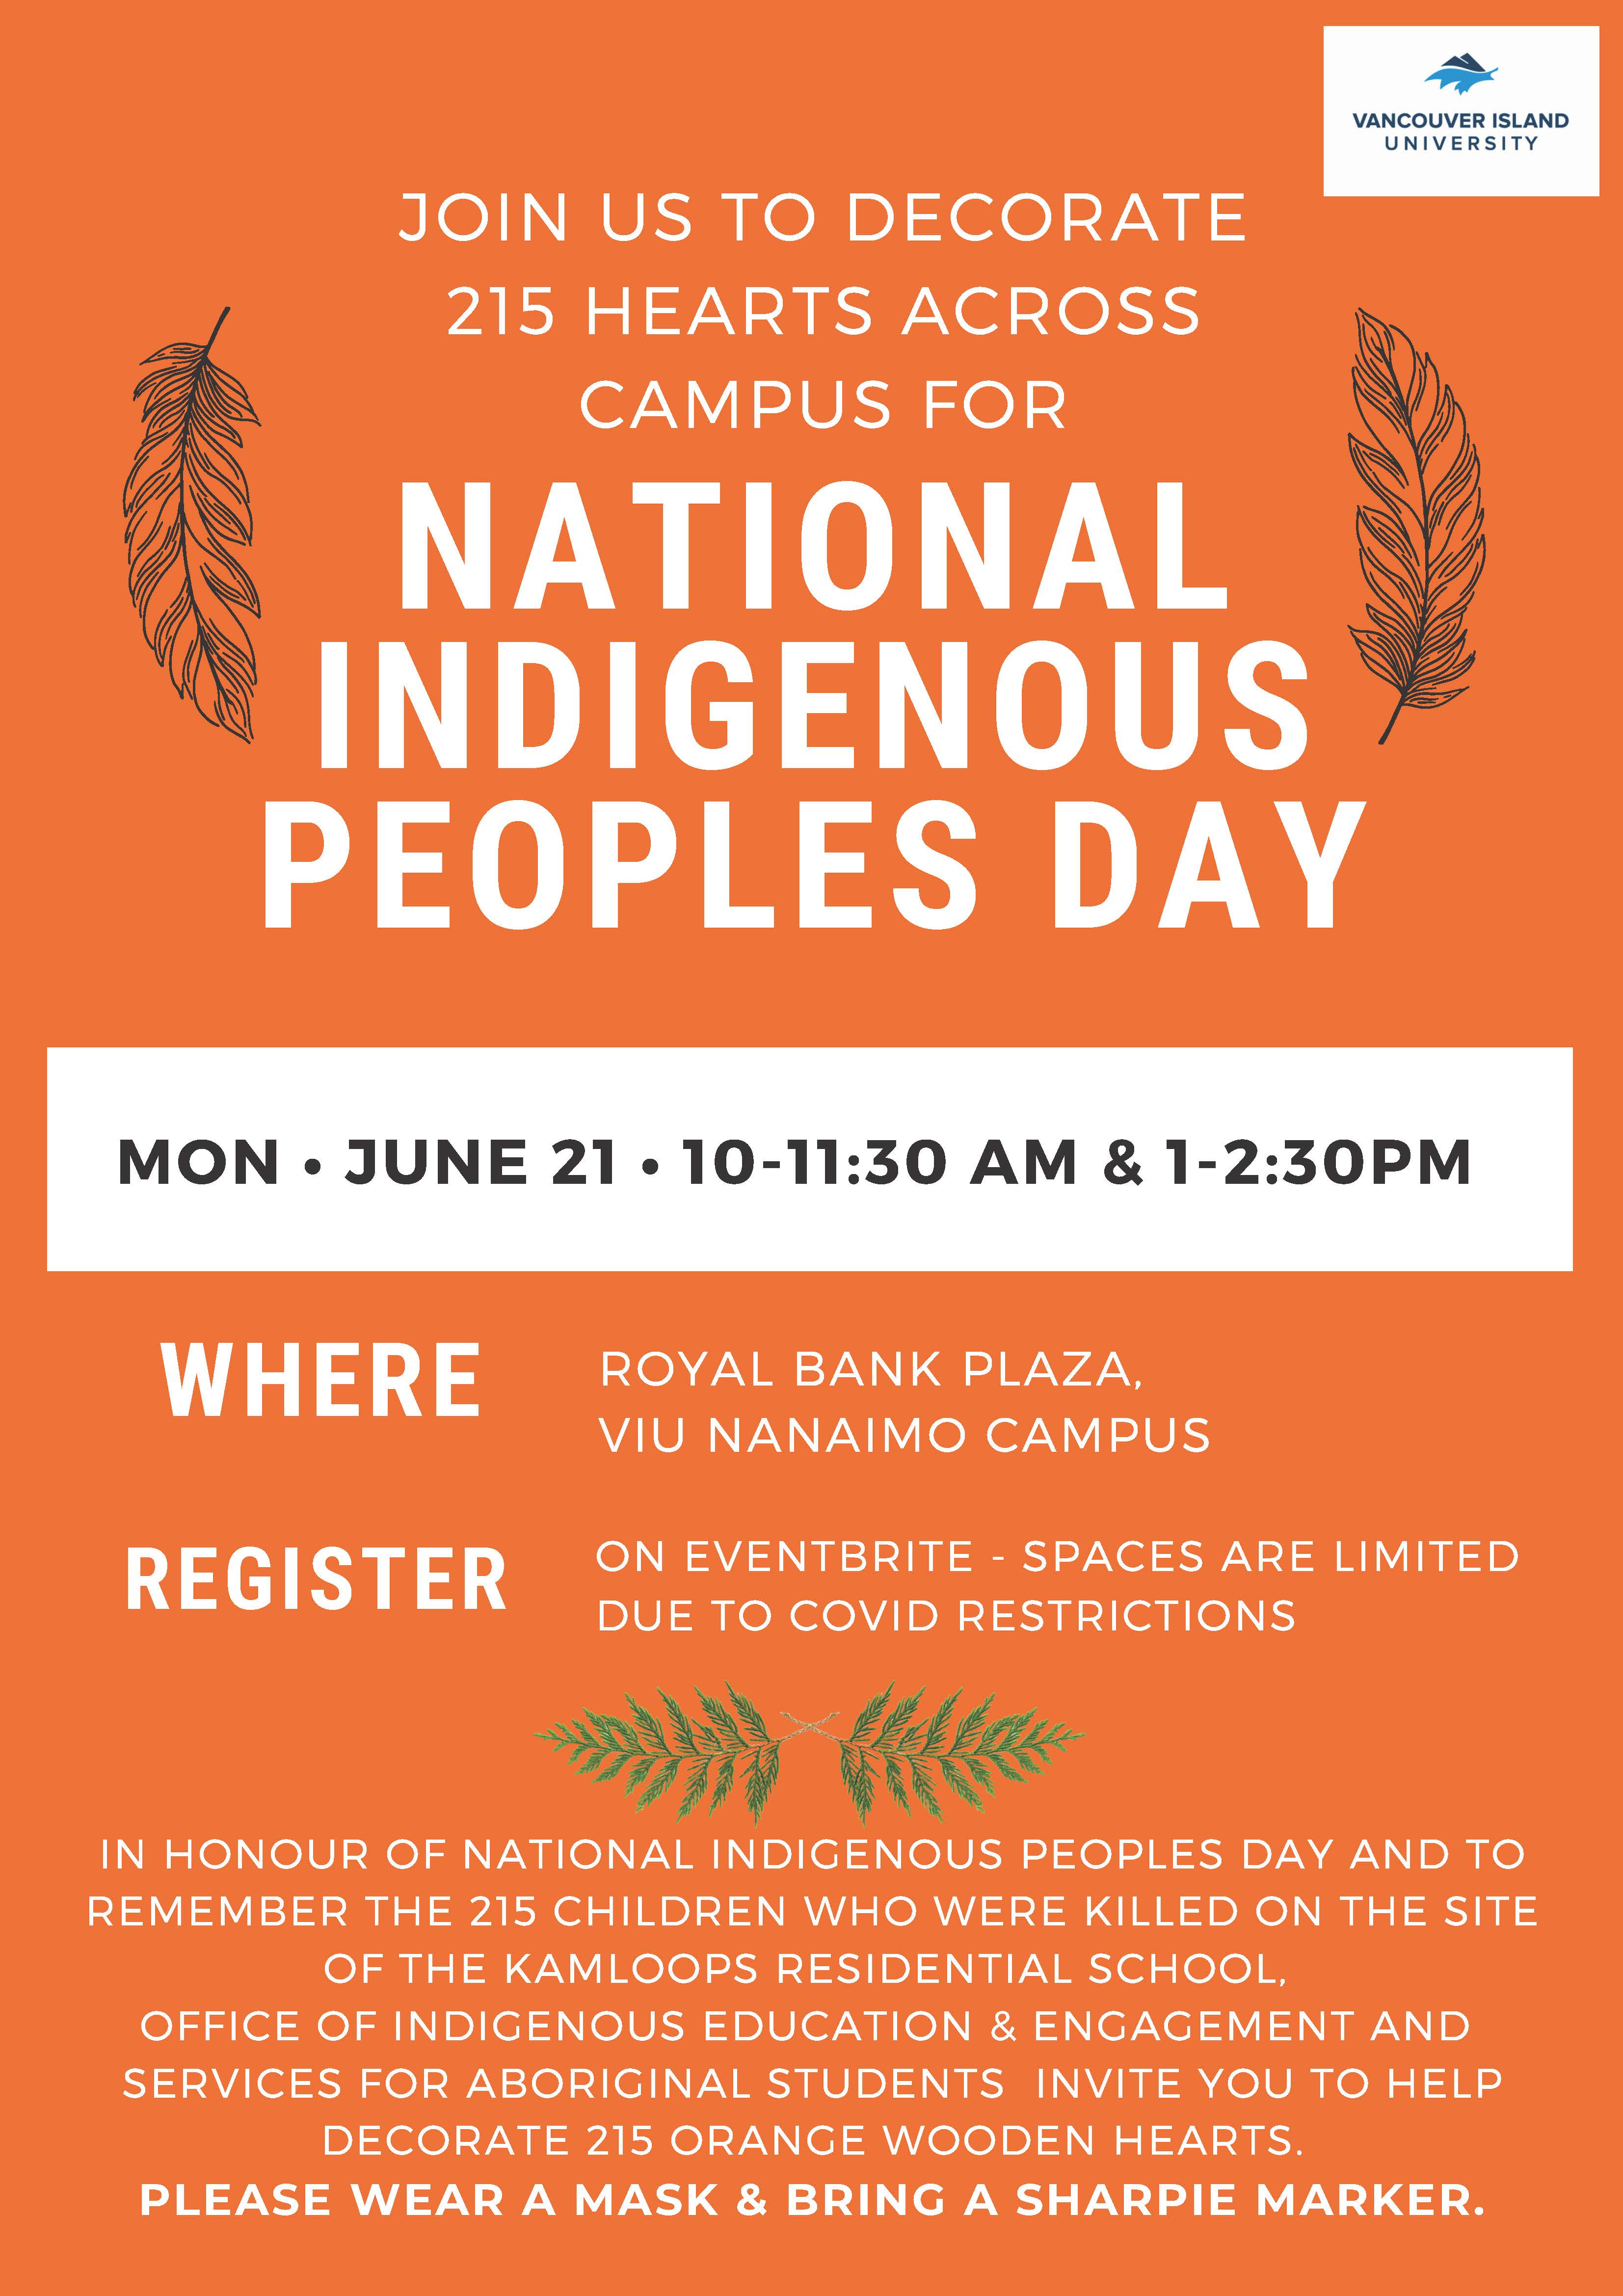 Julius Mccoy Buzz National Indigenous Peoples Day Events Vancouver 2022